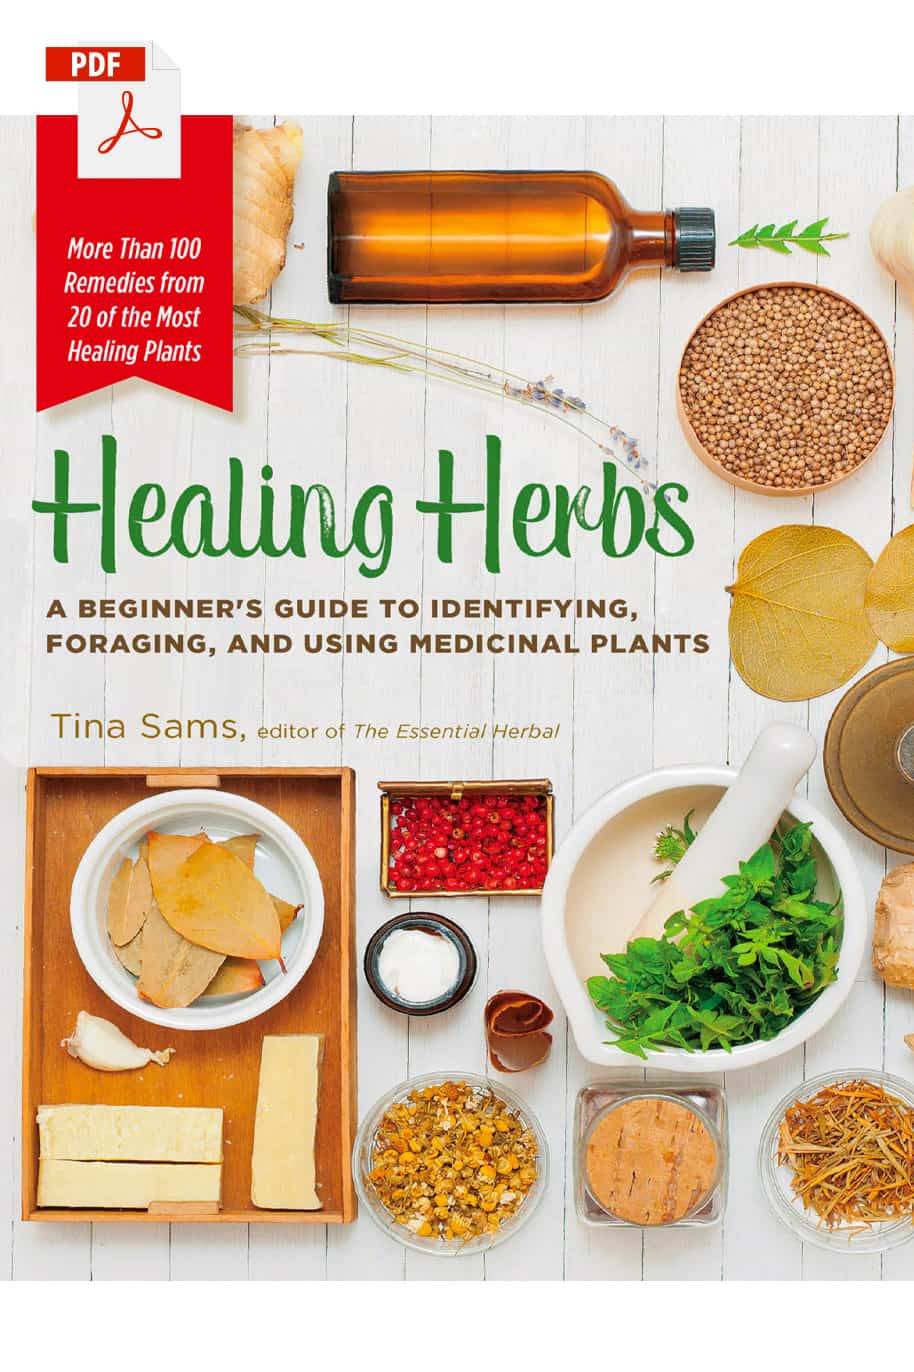 Healing Herbs - 195 pages